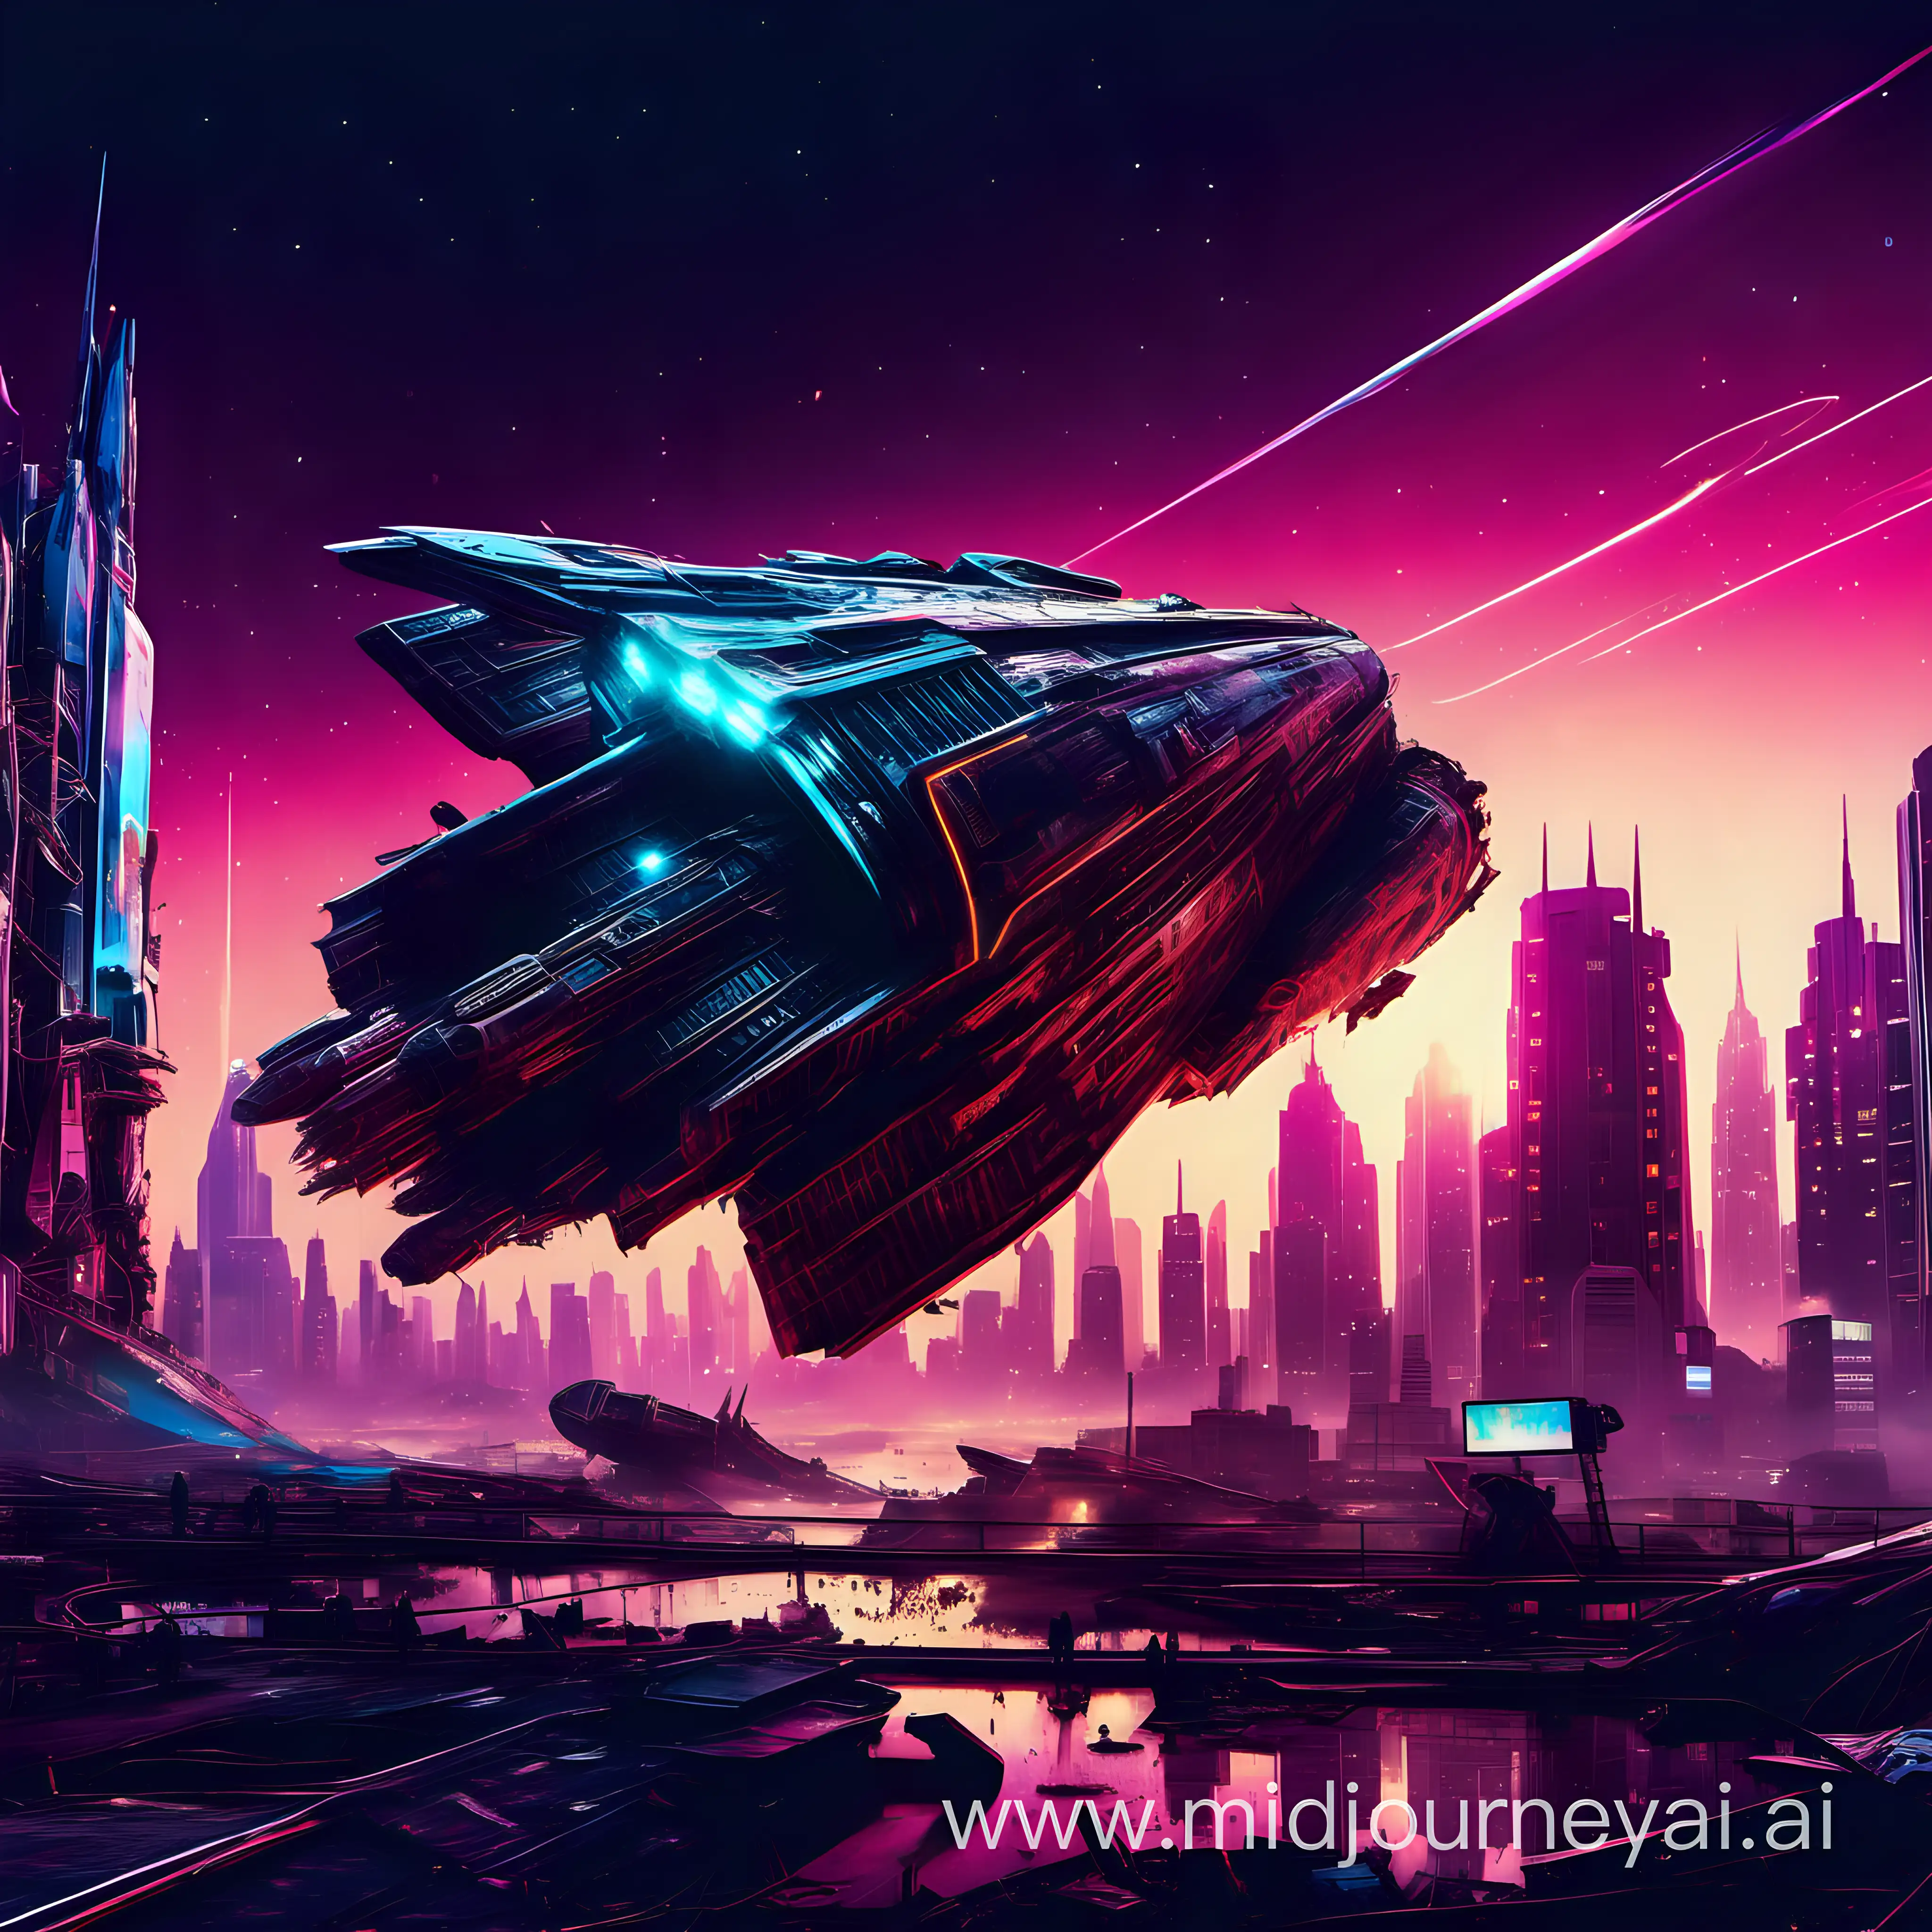 A crashed spaceship is seen in the foreground and in the background is a neon cityscape